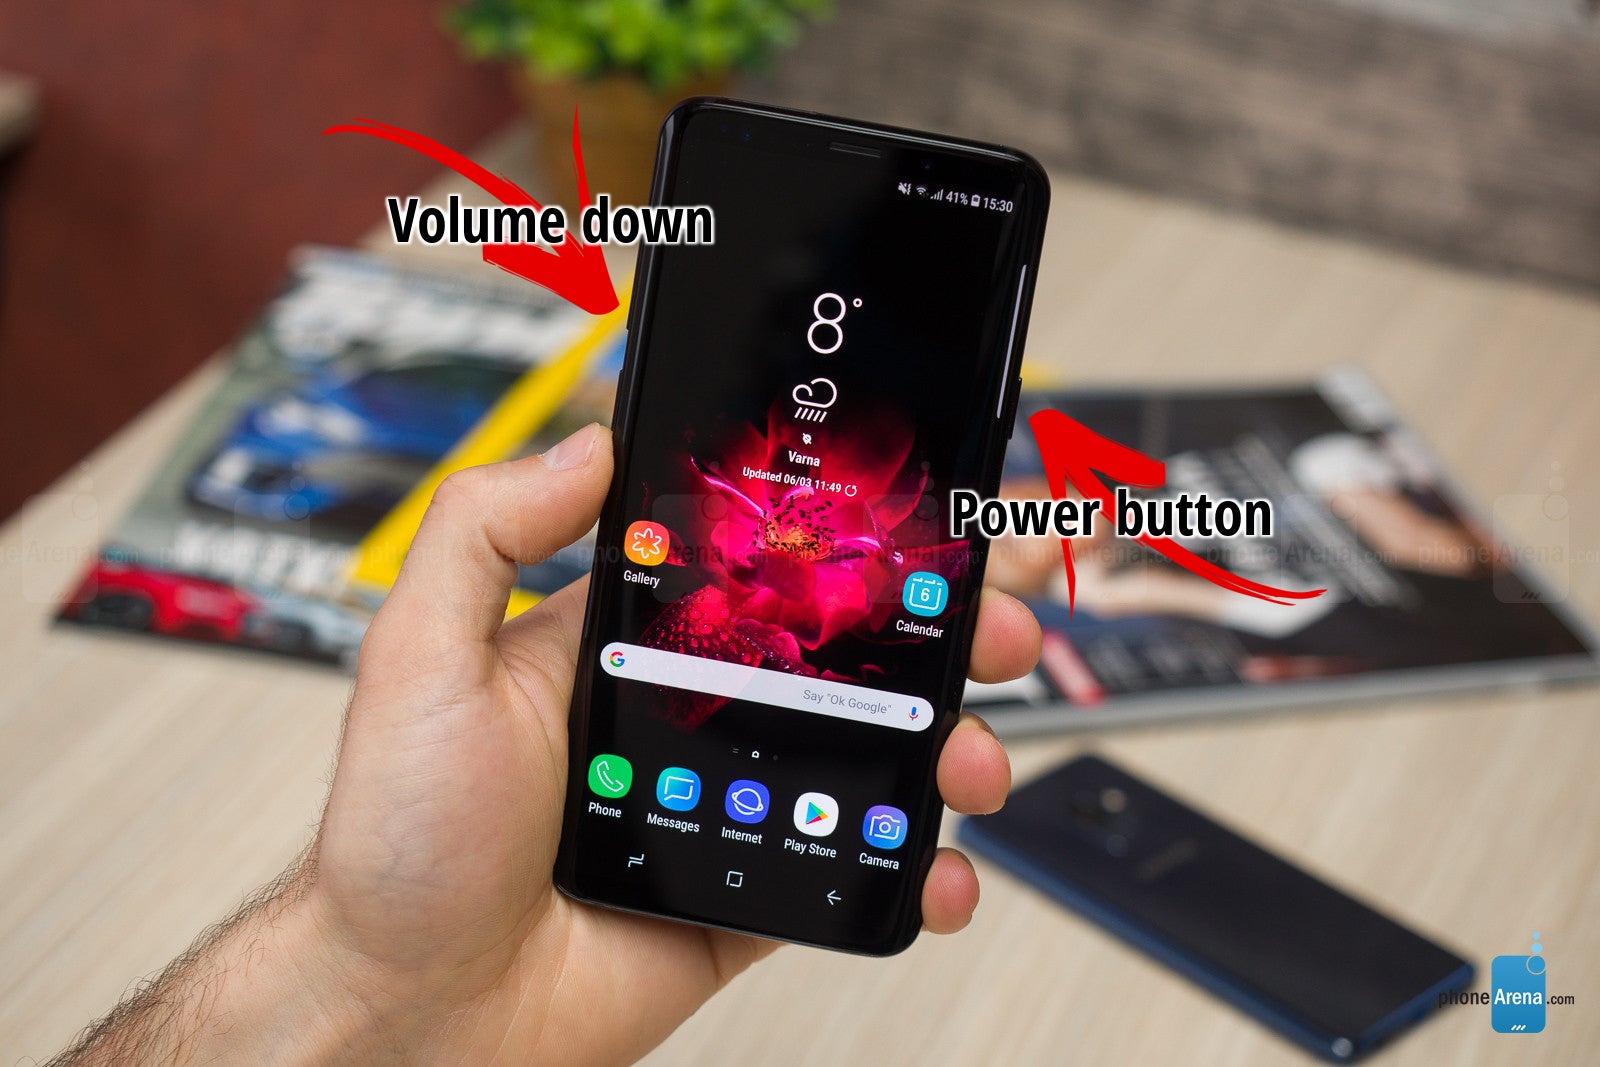 How to force restart your Samsung Galaxy S9 or S9+